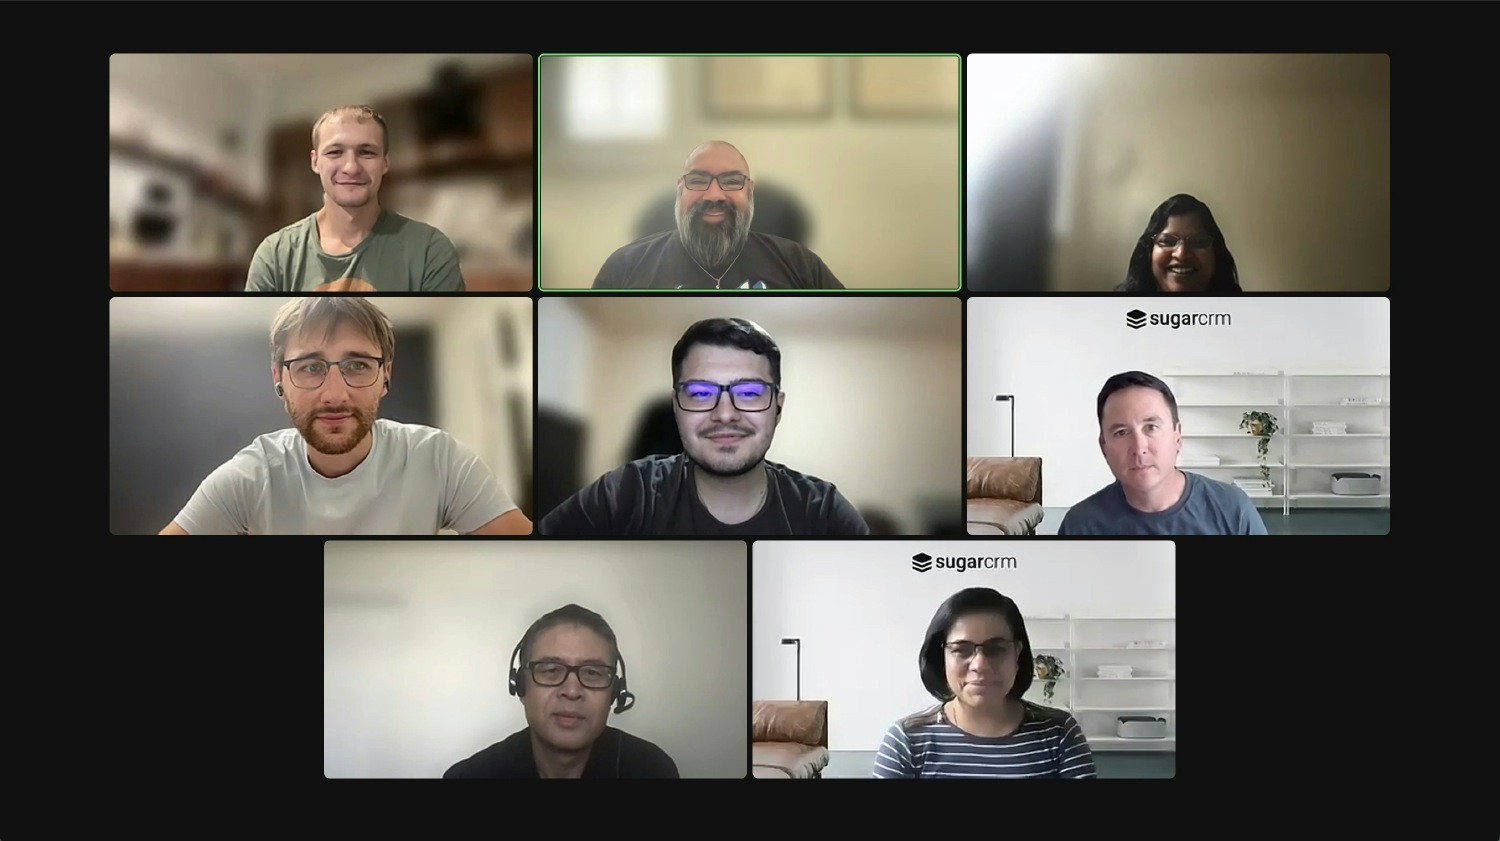 As a remote-first company, we spend time together virtually